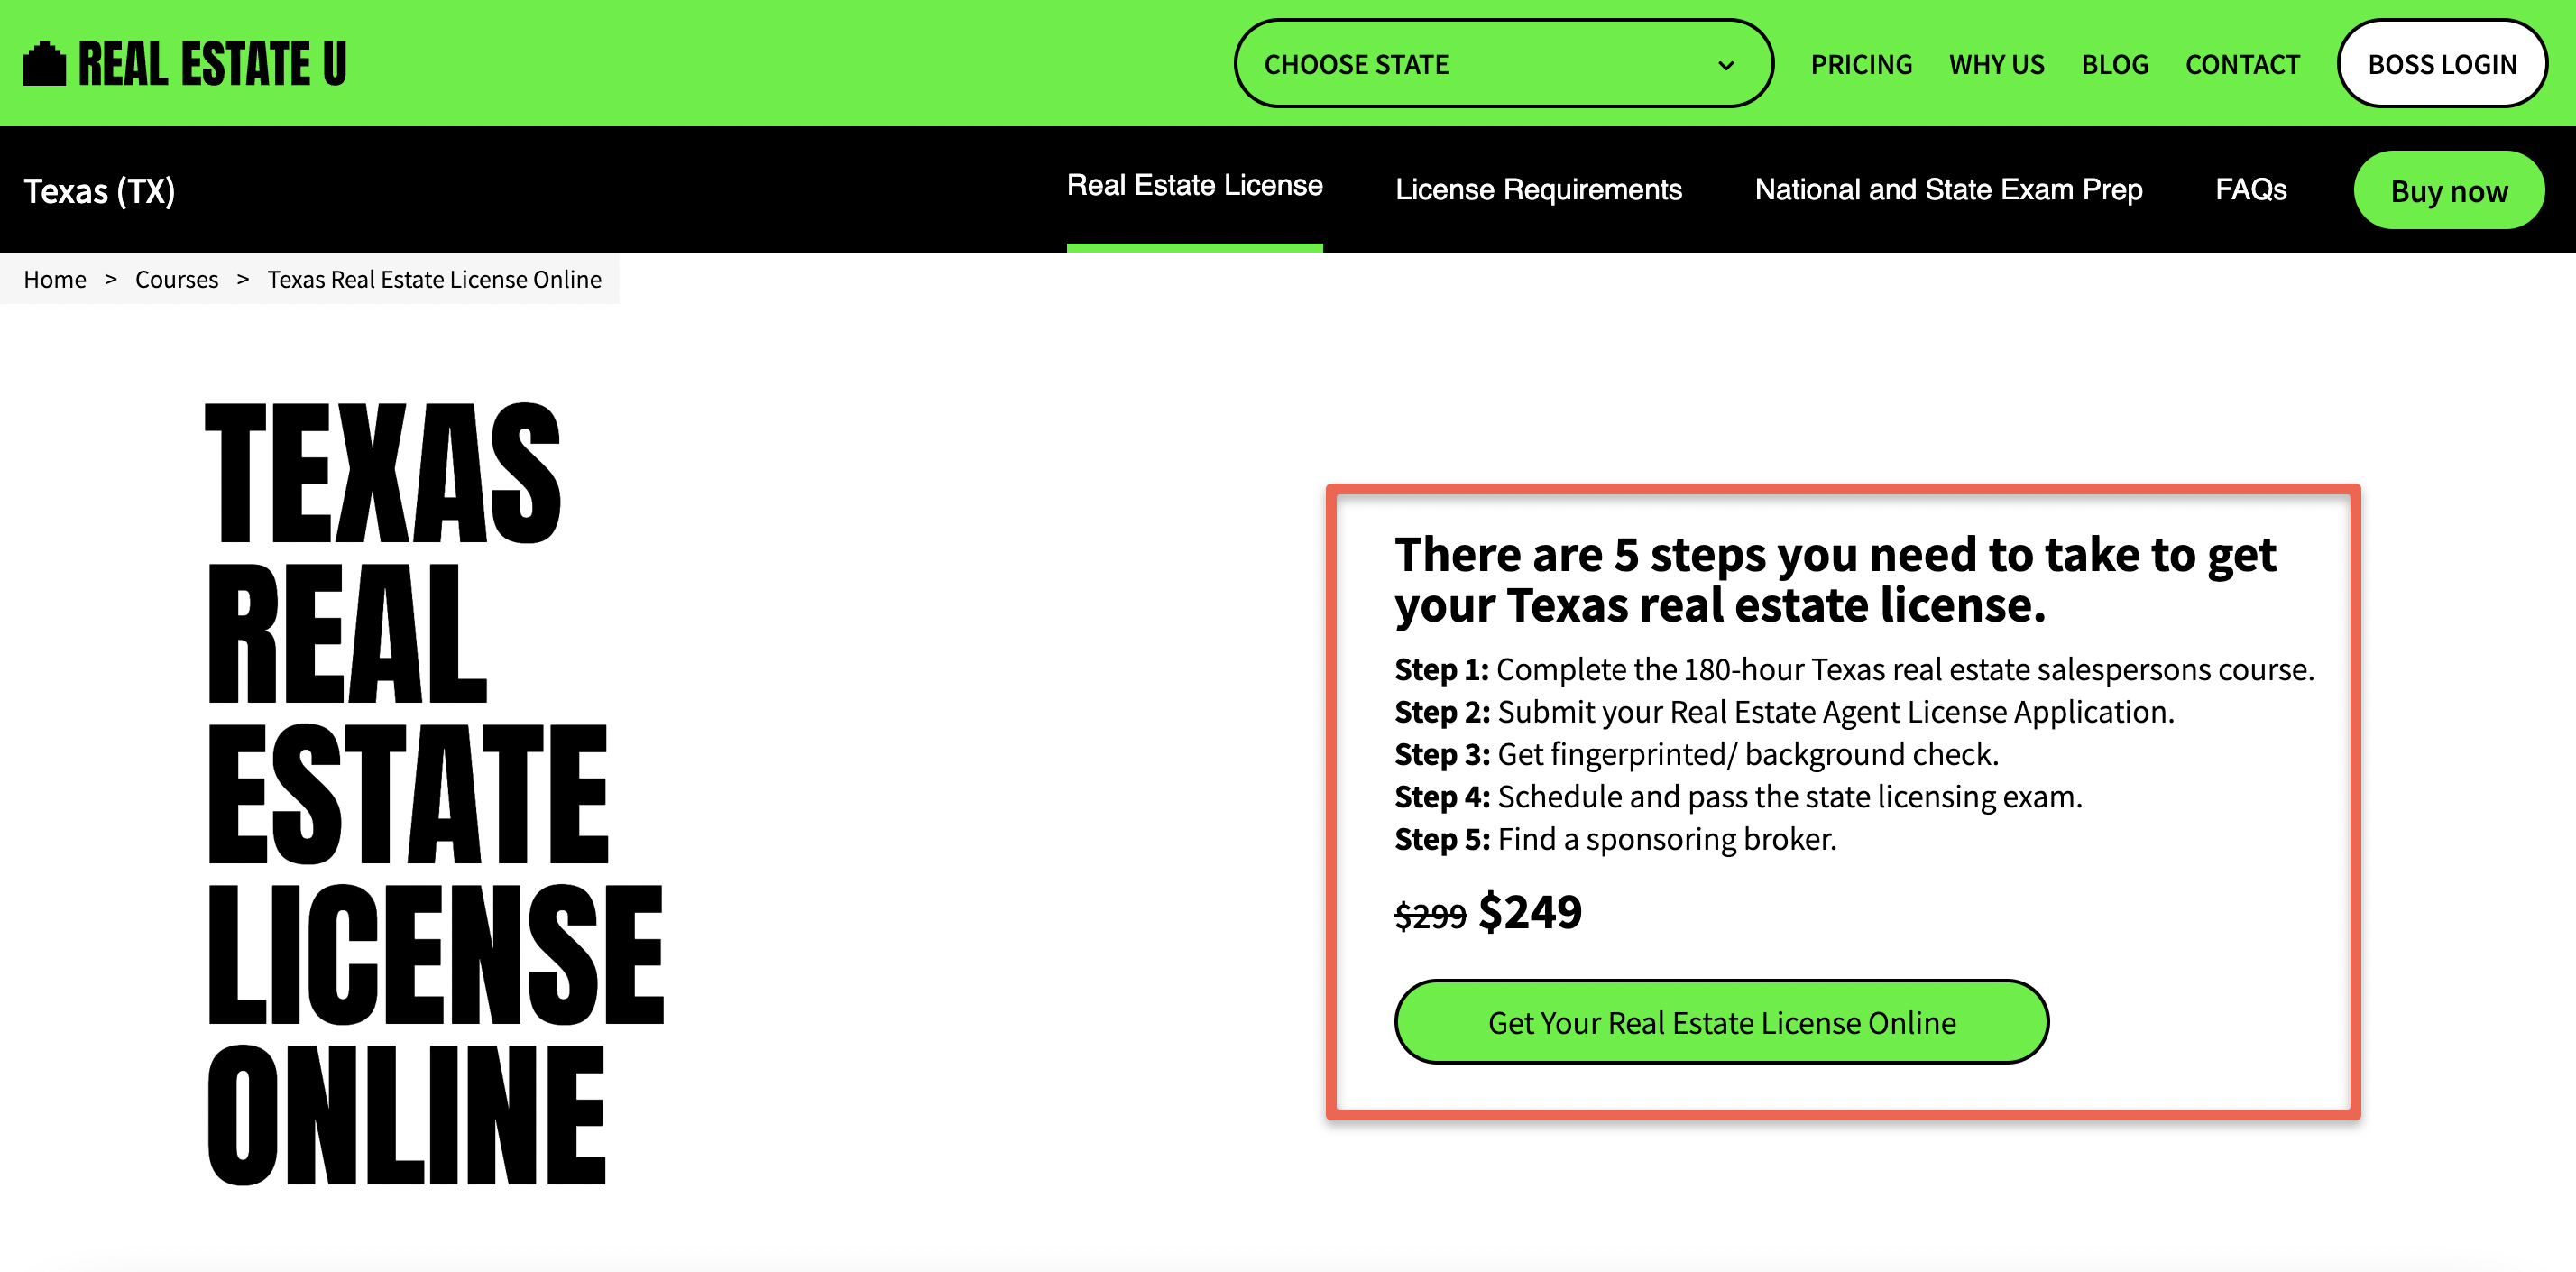 Affordable option for the Texas Real Estate License Online course from RealEstateU.